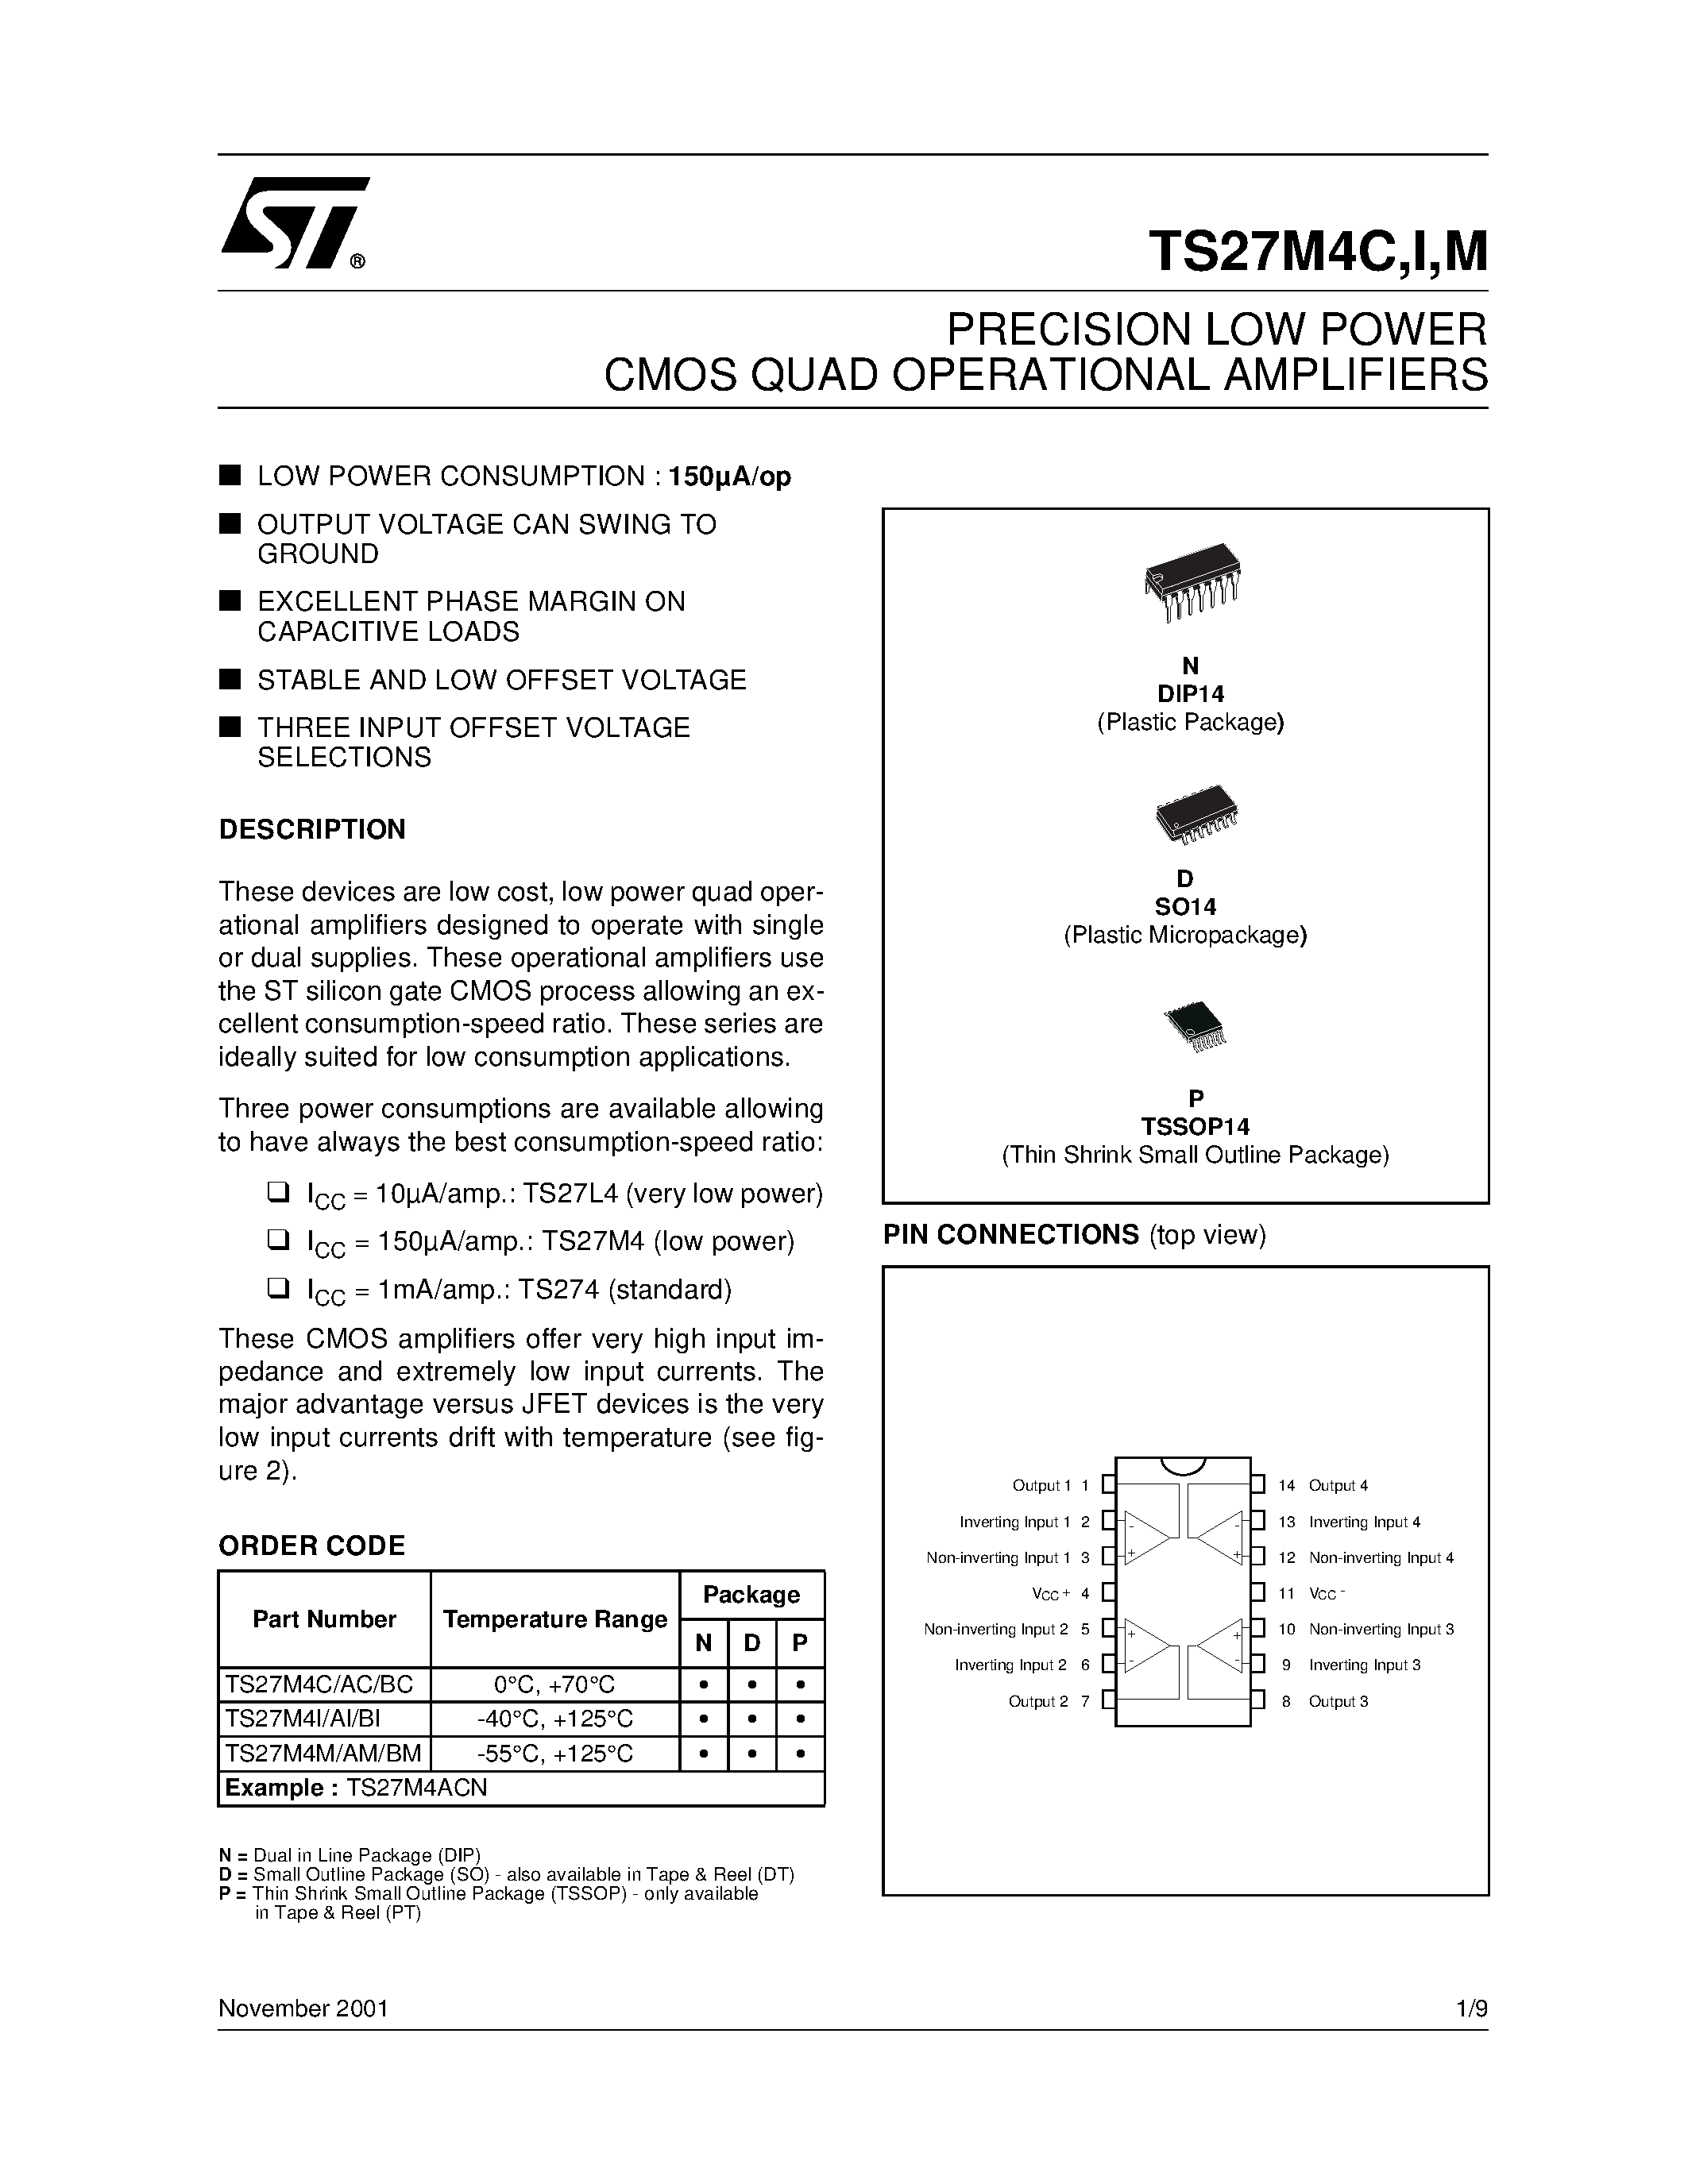 Datasheet TS27M4AI - PRECISION LOW POWER CMOS QUAD OPERATIONAL AMPLIFIERS page 1